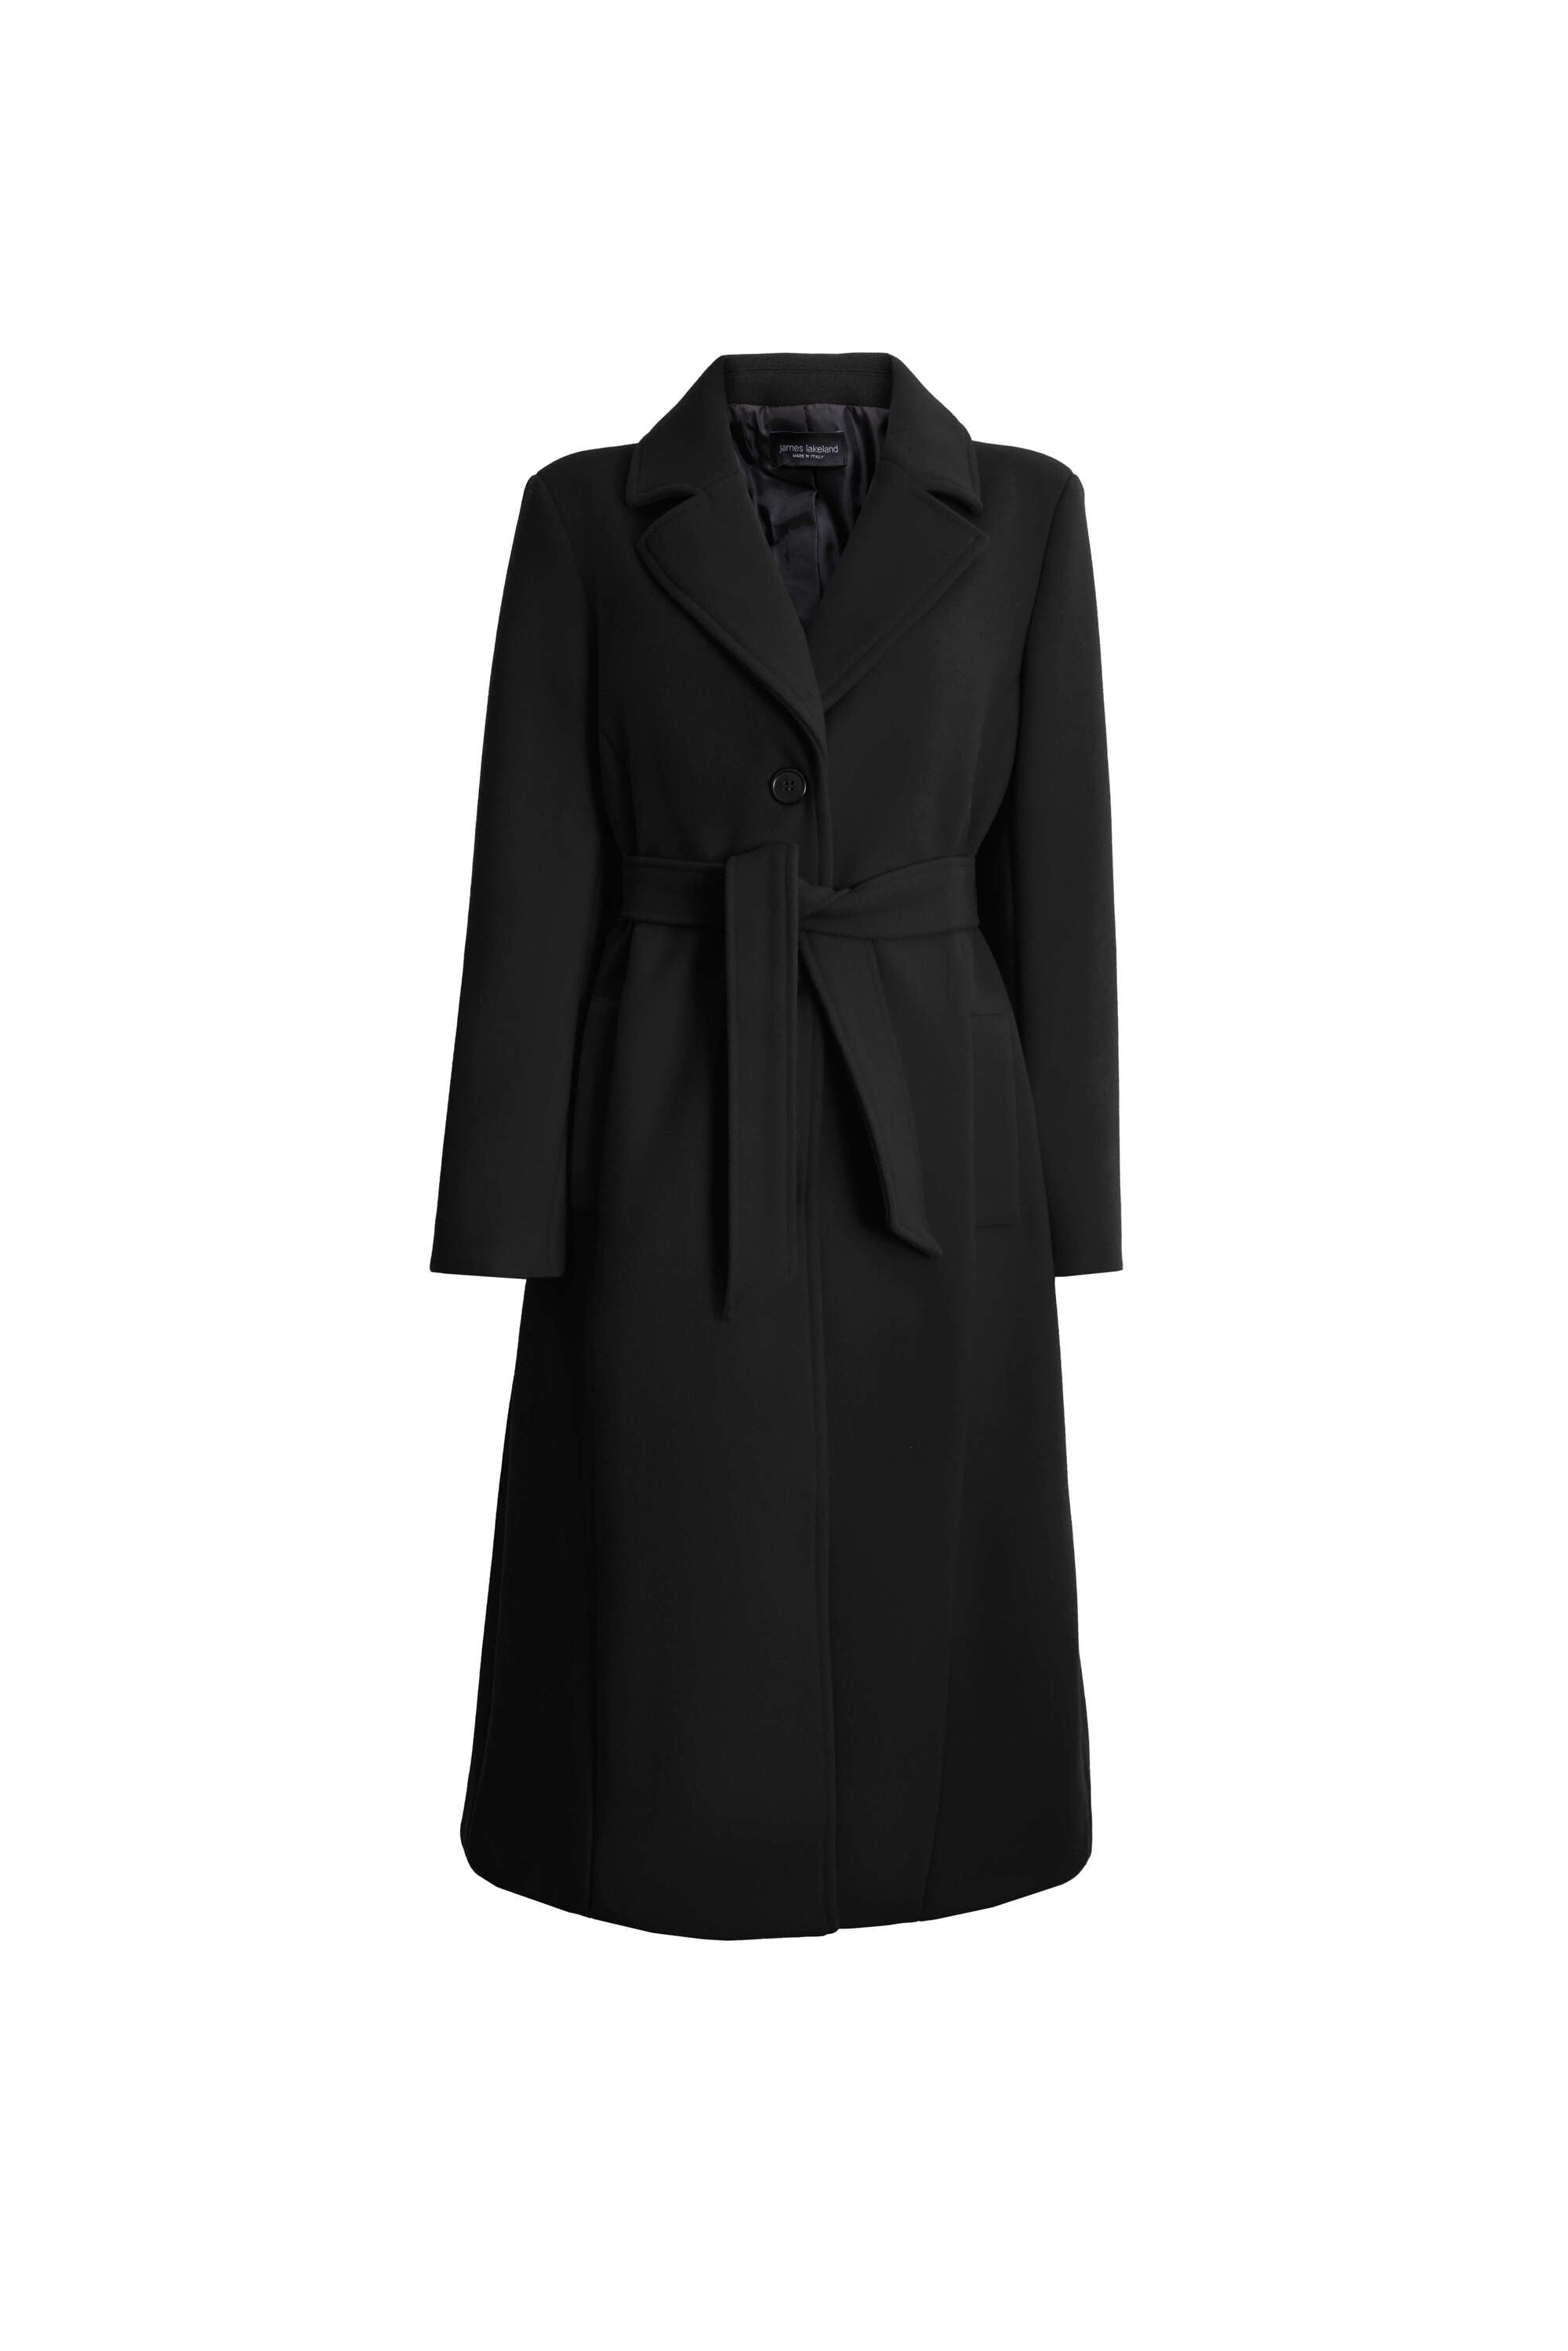 Women’s Three Buttons Belted Coat In Black Small James Lakeland